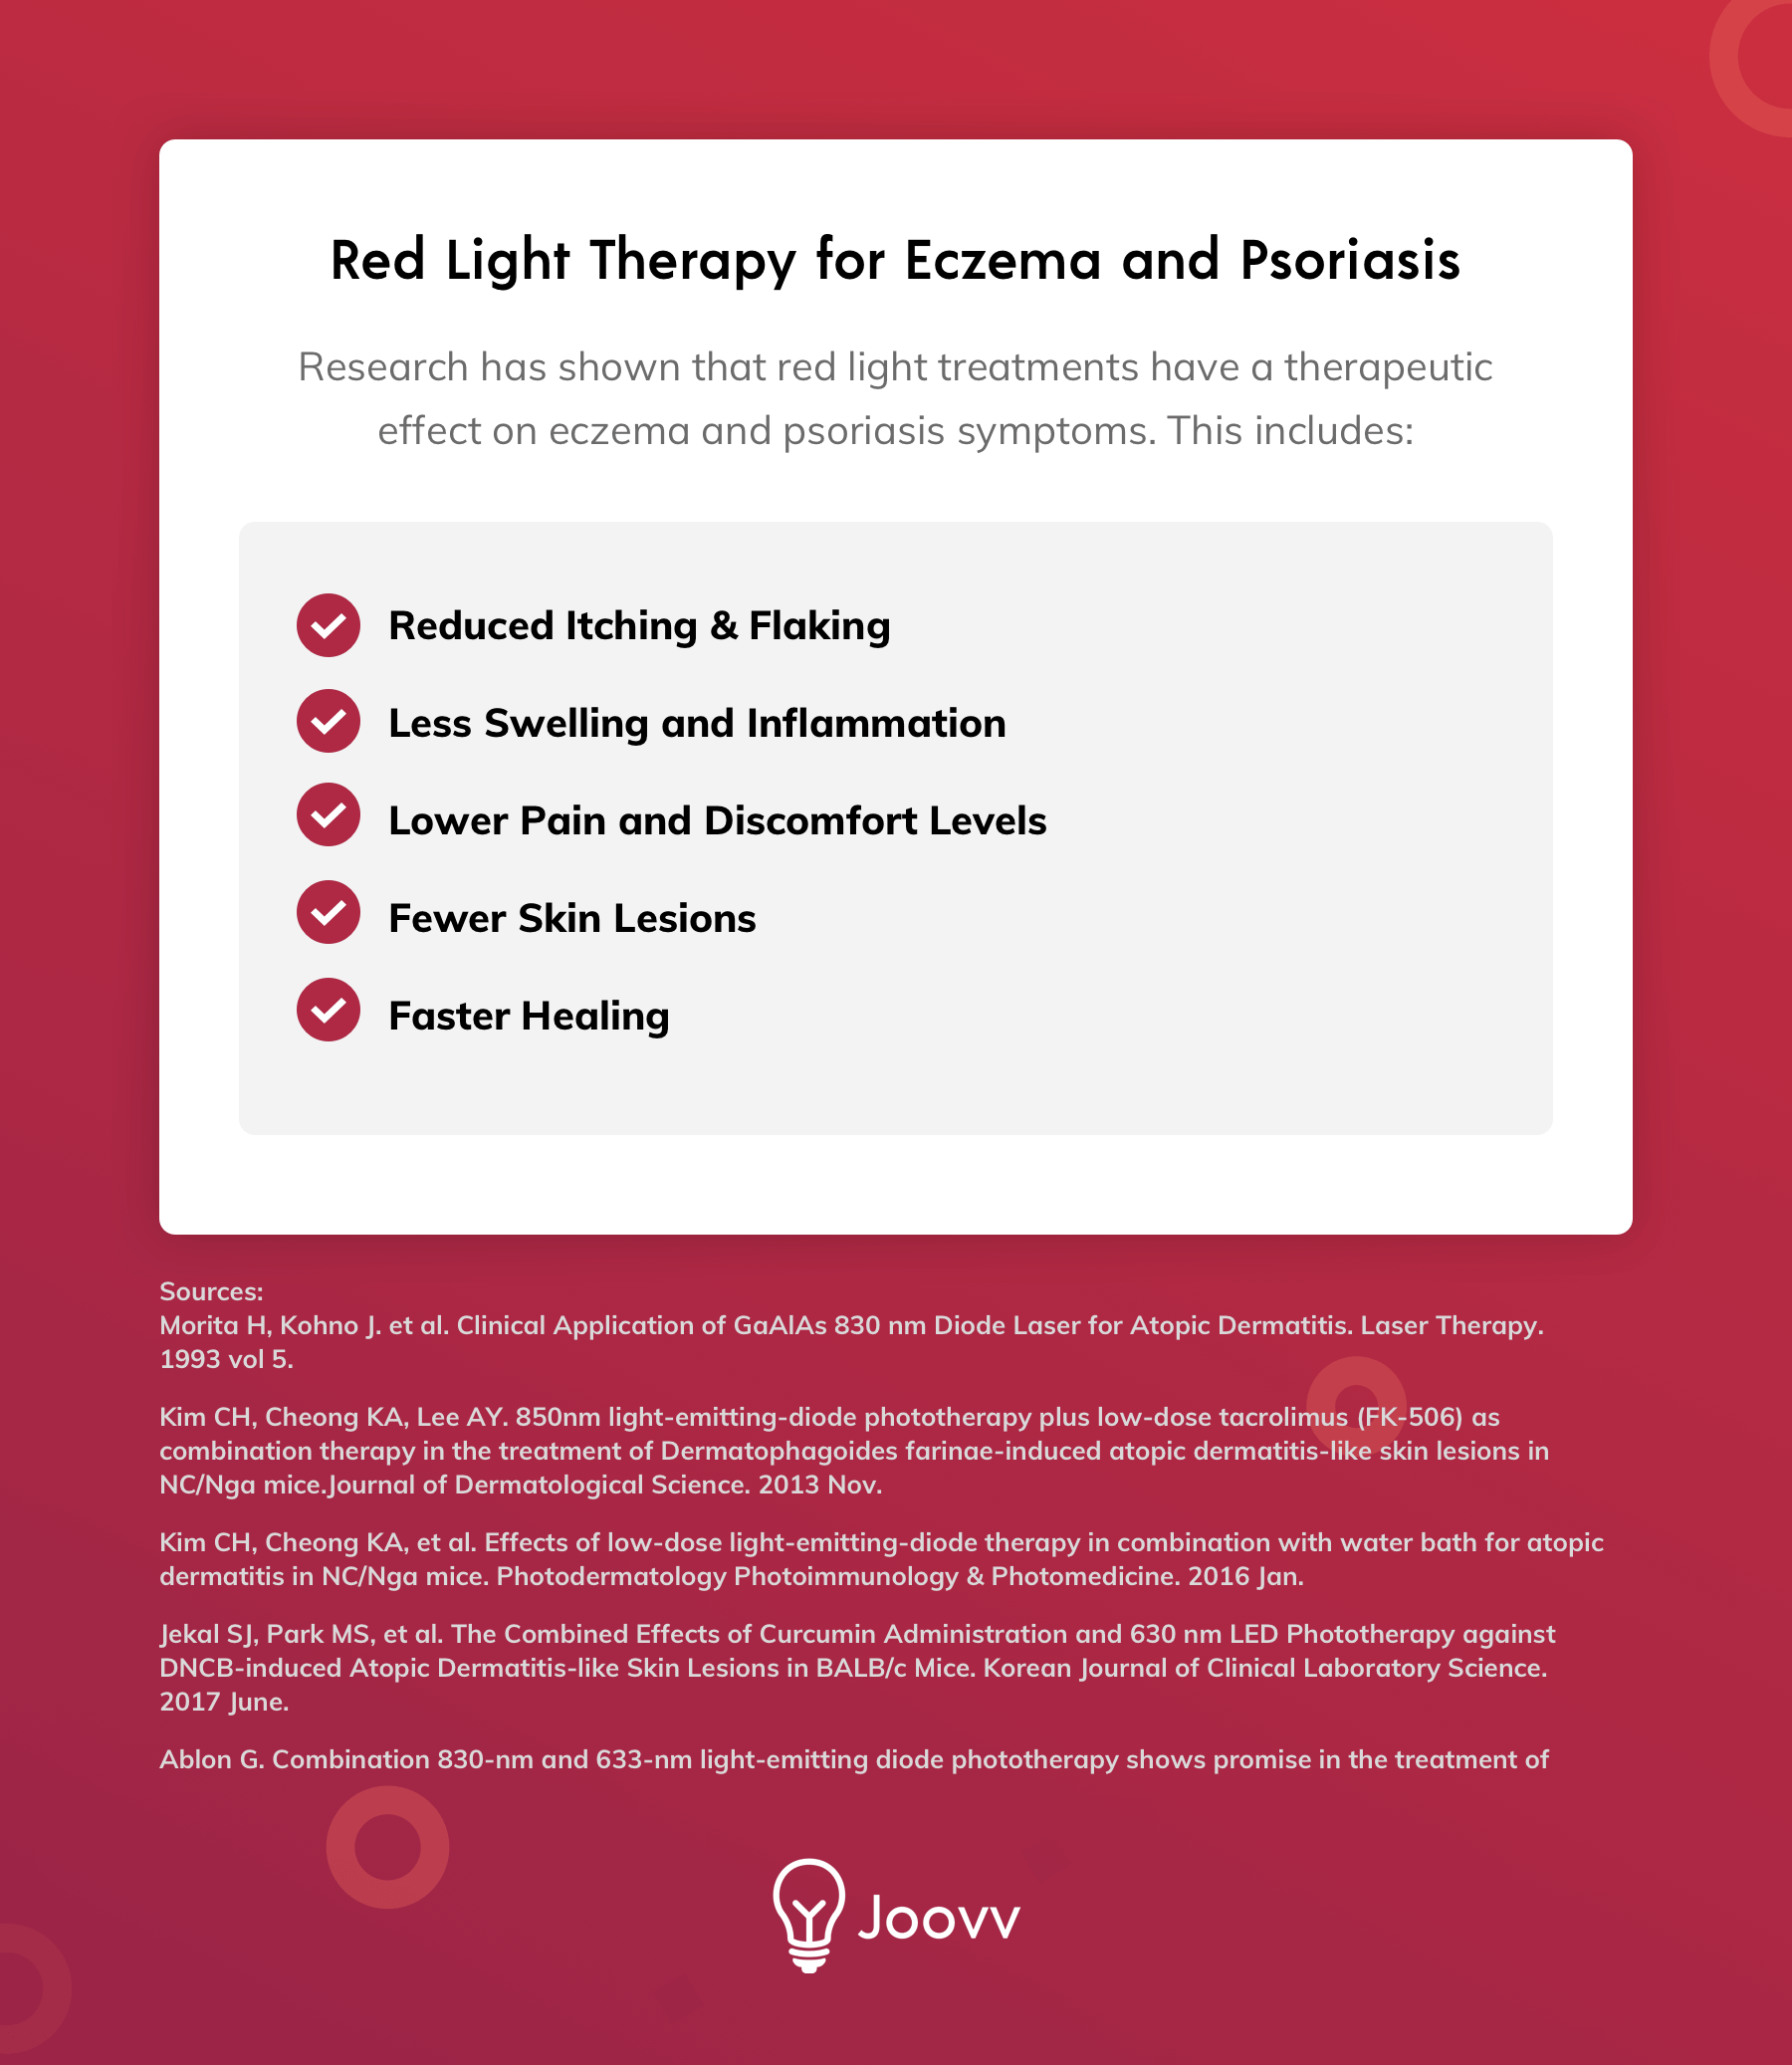 Red Light Therapy for Treating Eczema and Psoriasis Symptoms